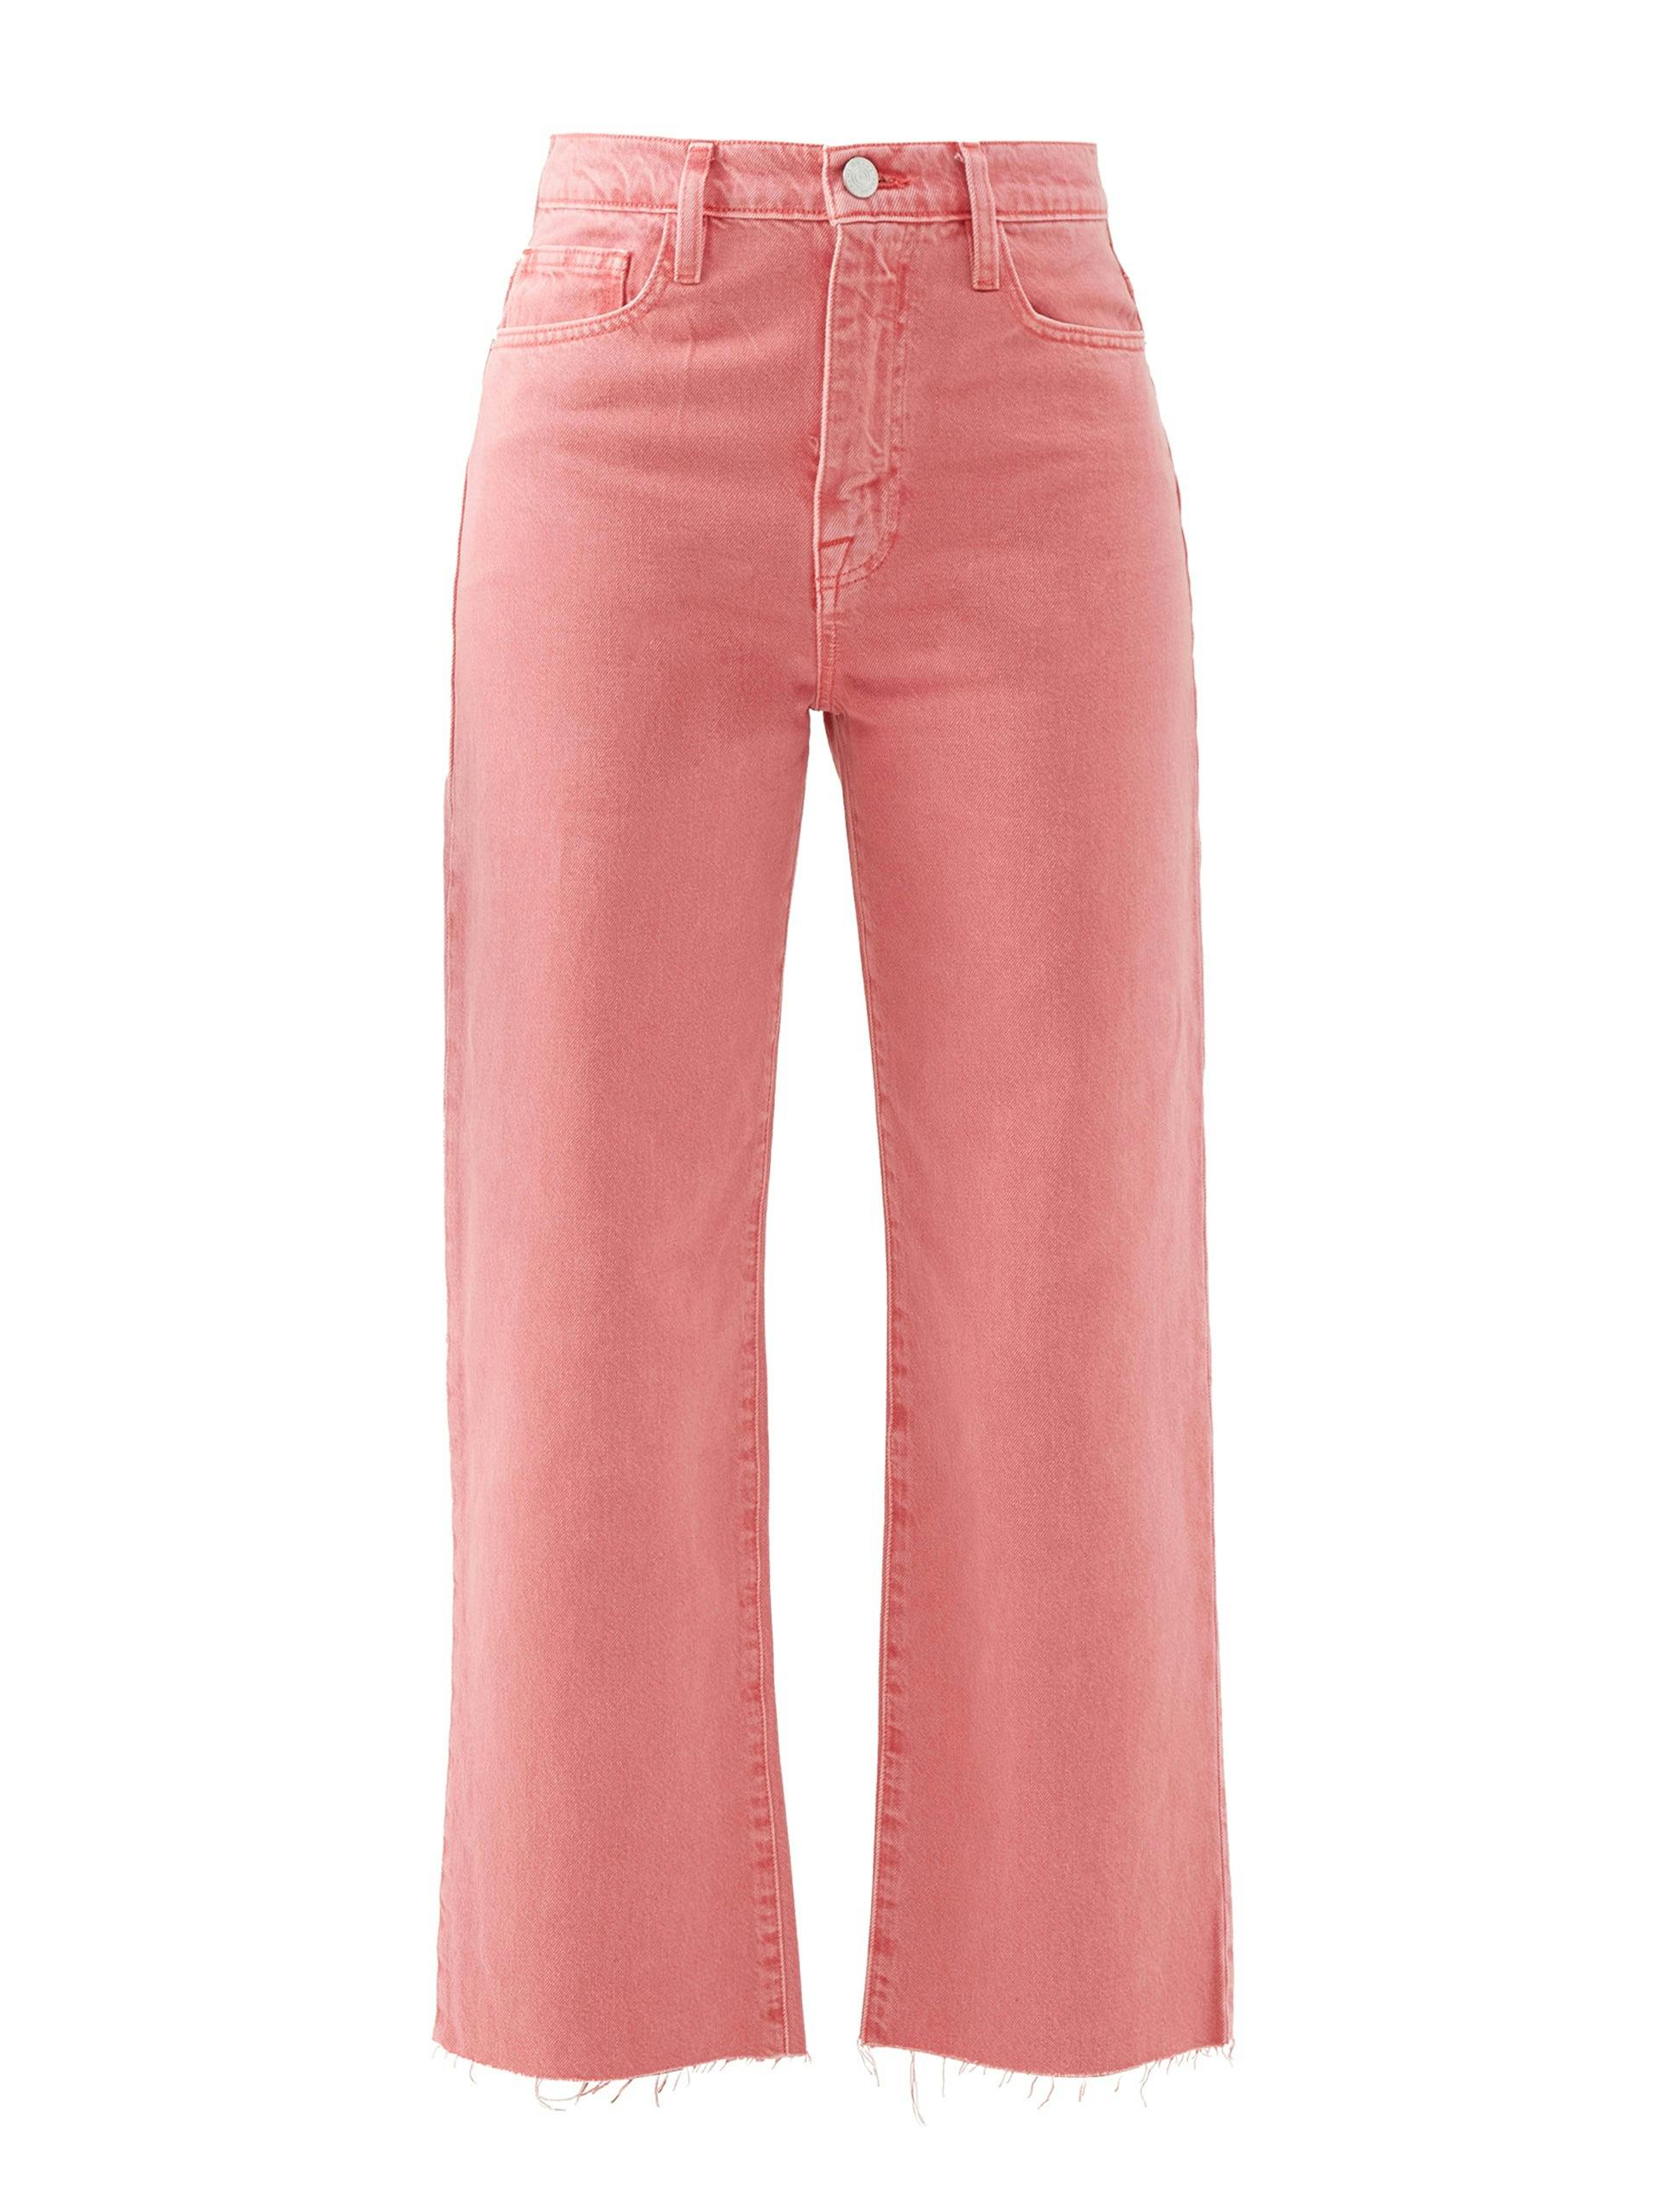 Pink cropped jeans